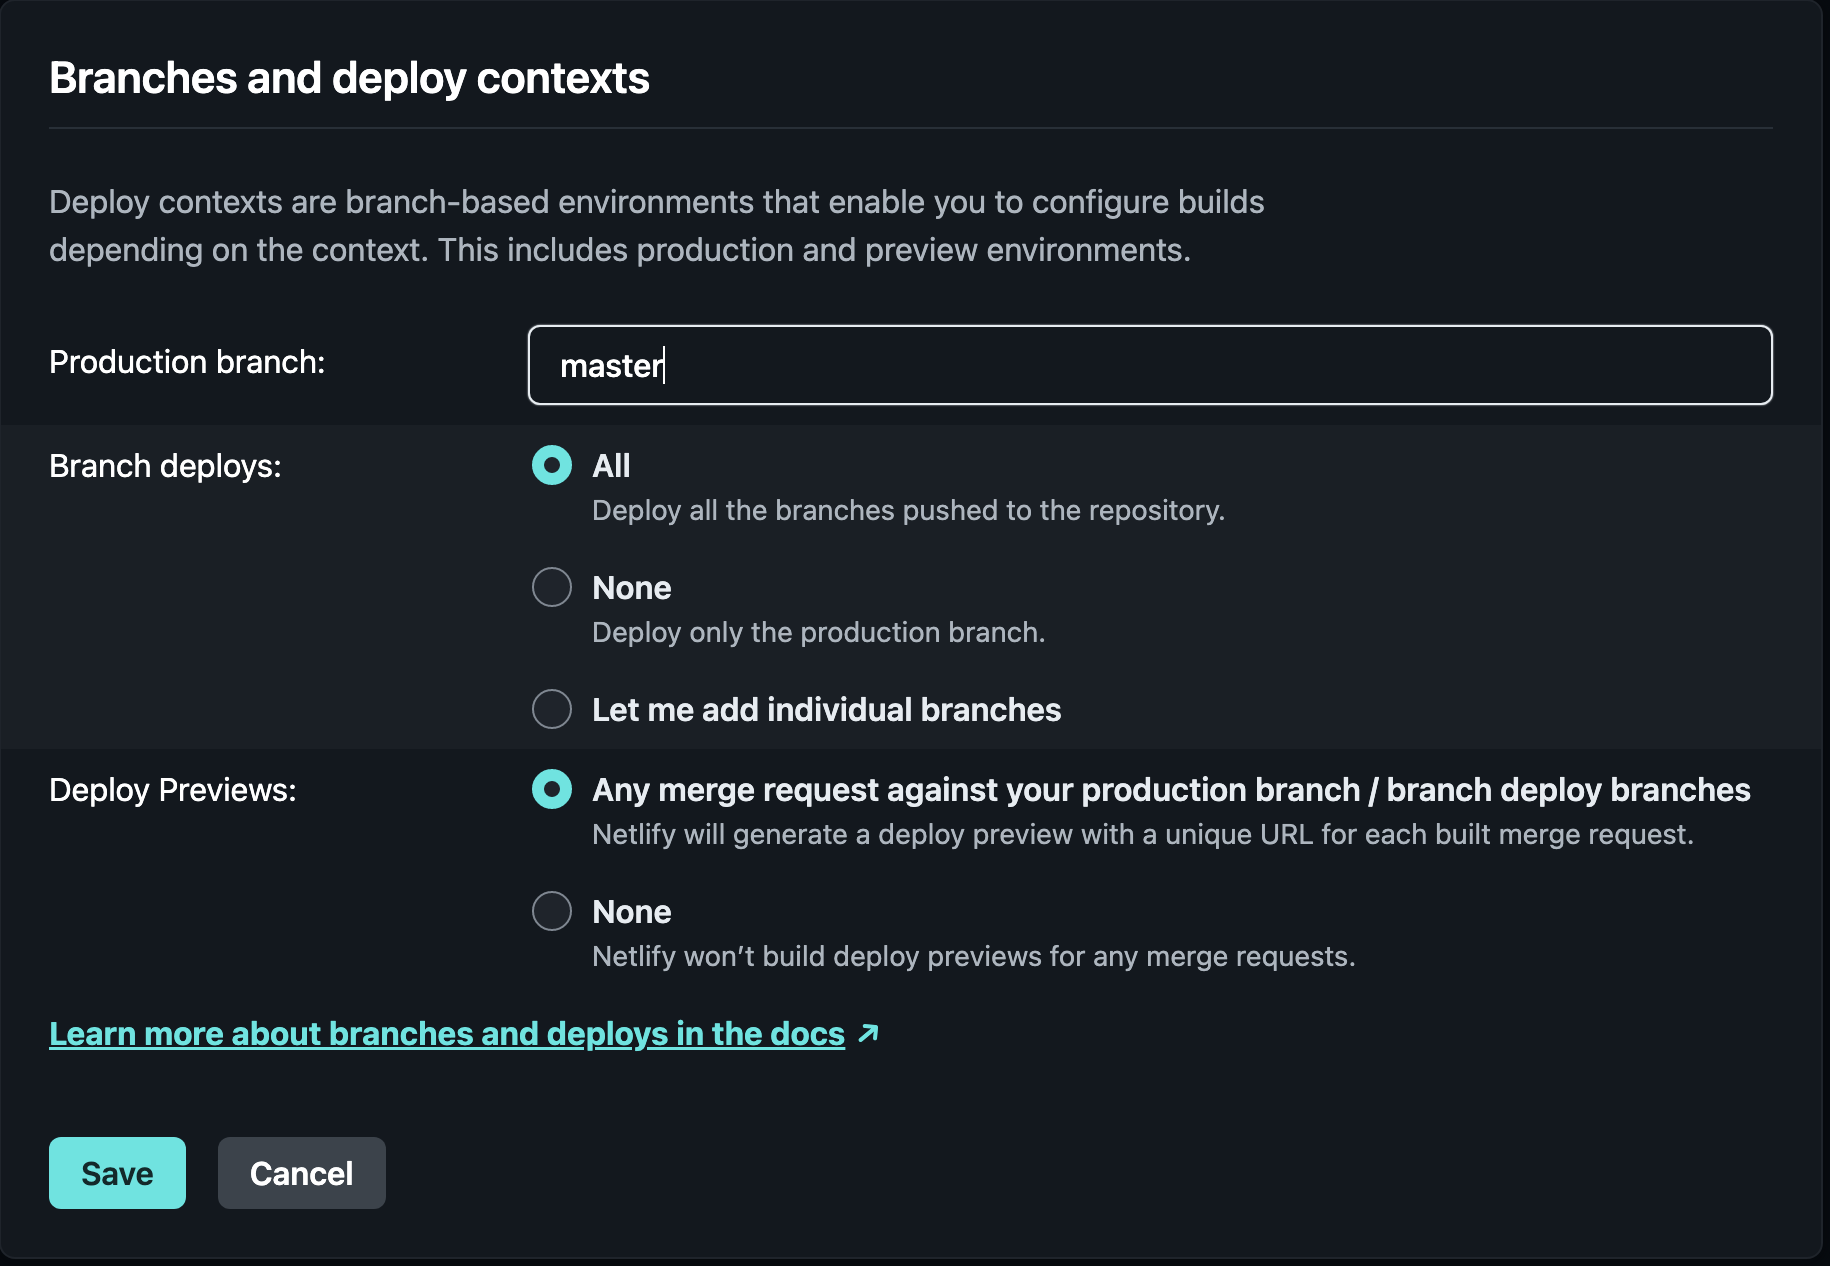 Screenshot showing the settings for branch-based deployment